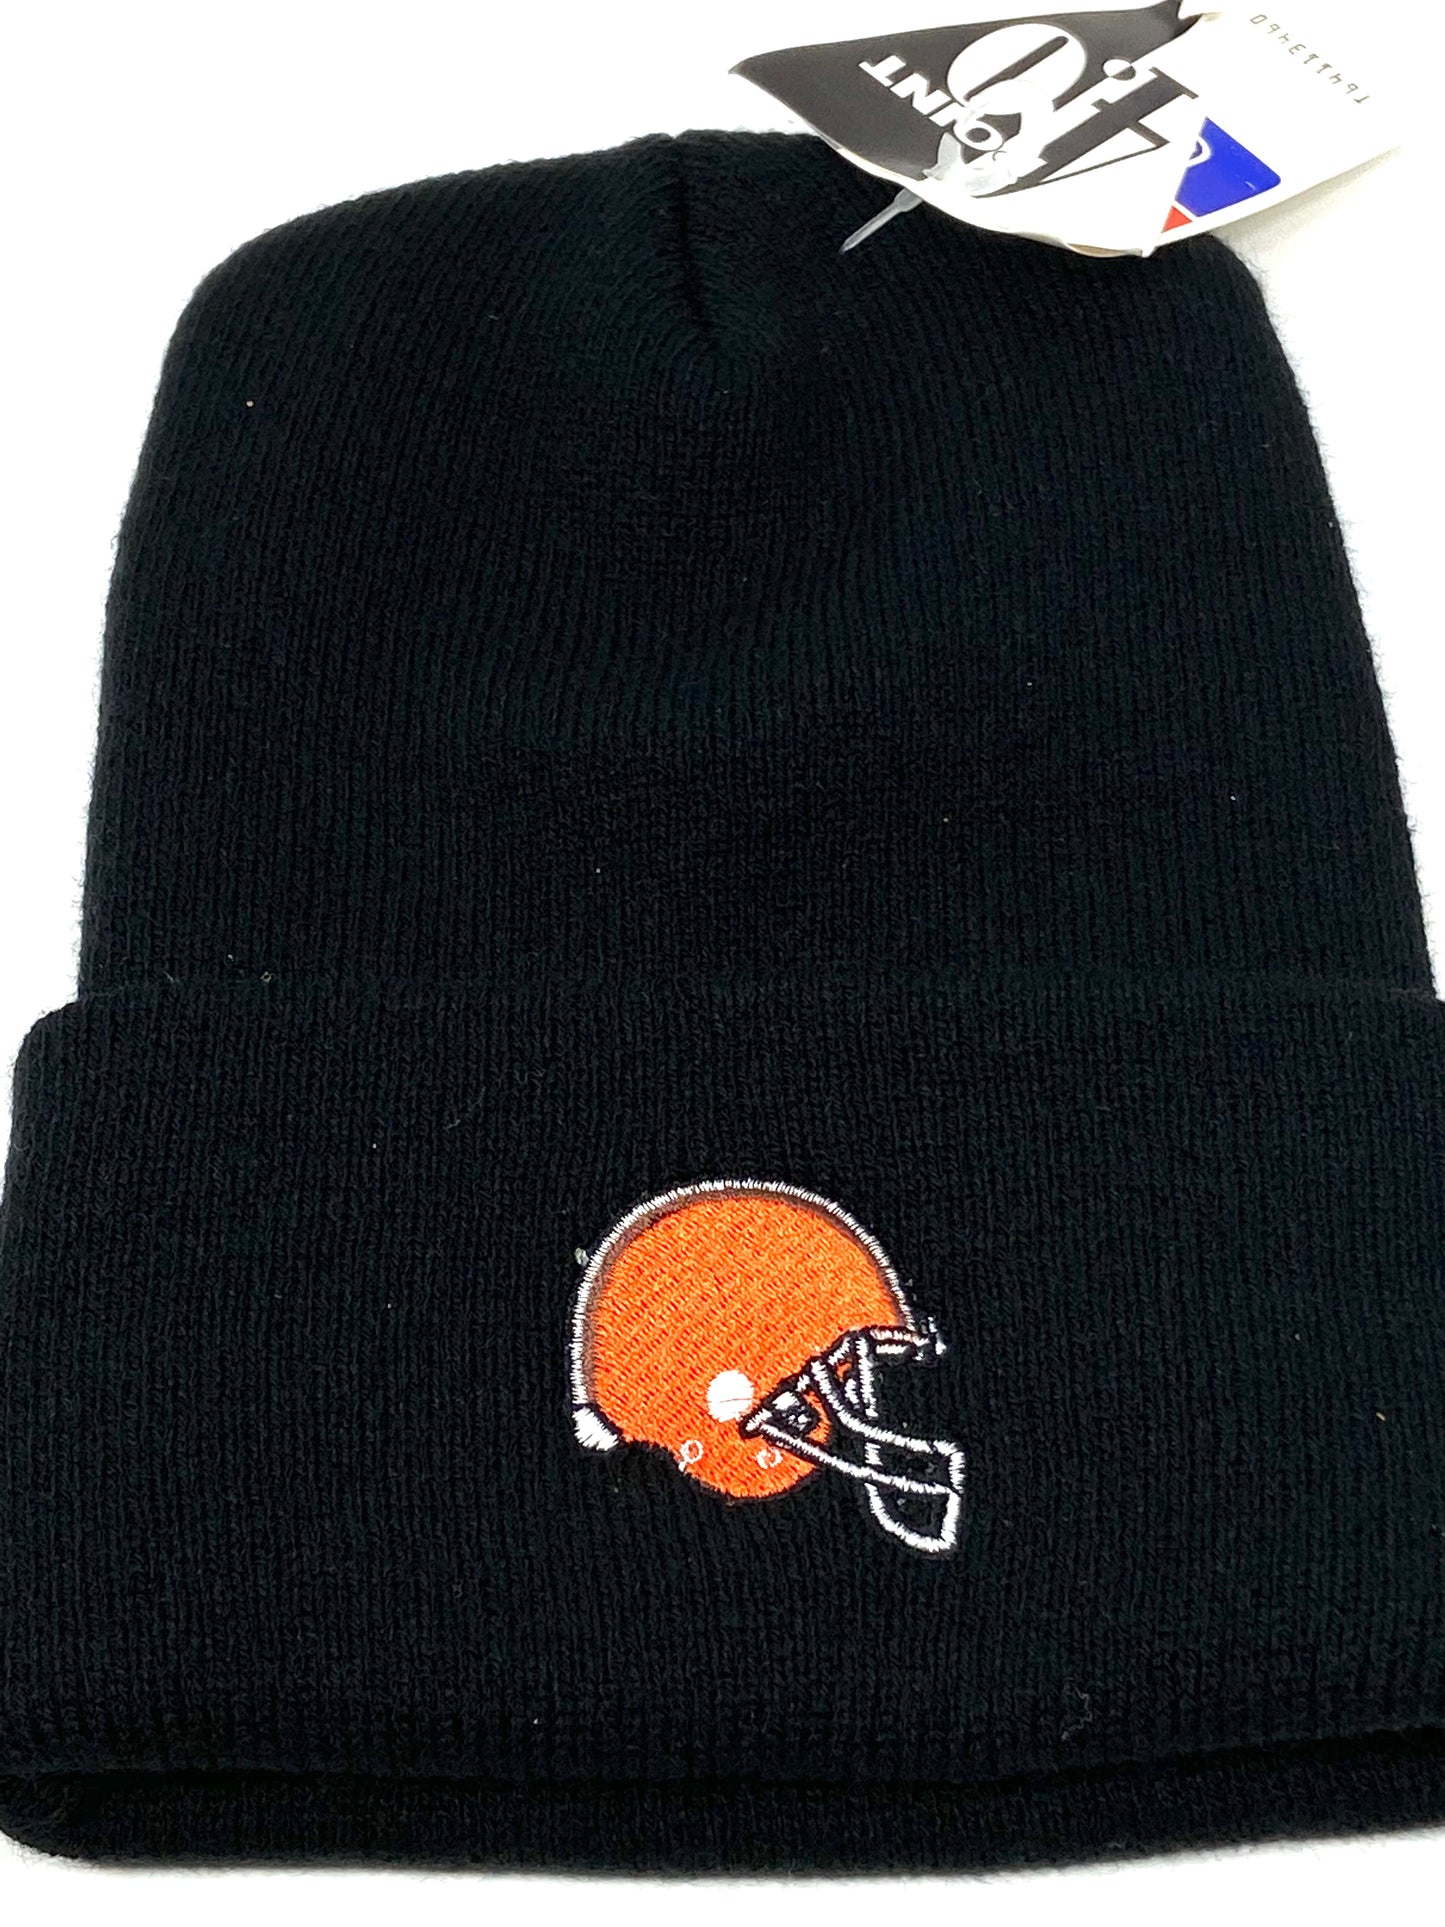 Cleveland Browns Vintage NFL Black Cuffed Knit Logo Hat by 4Point0